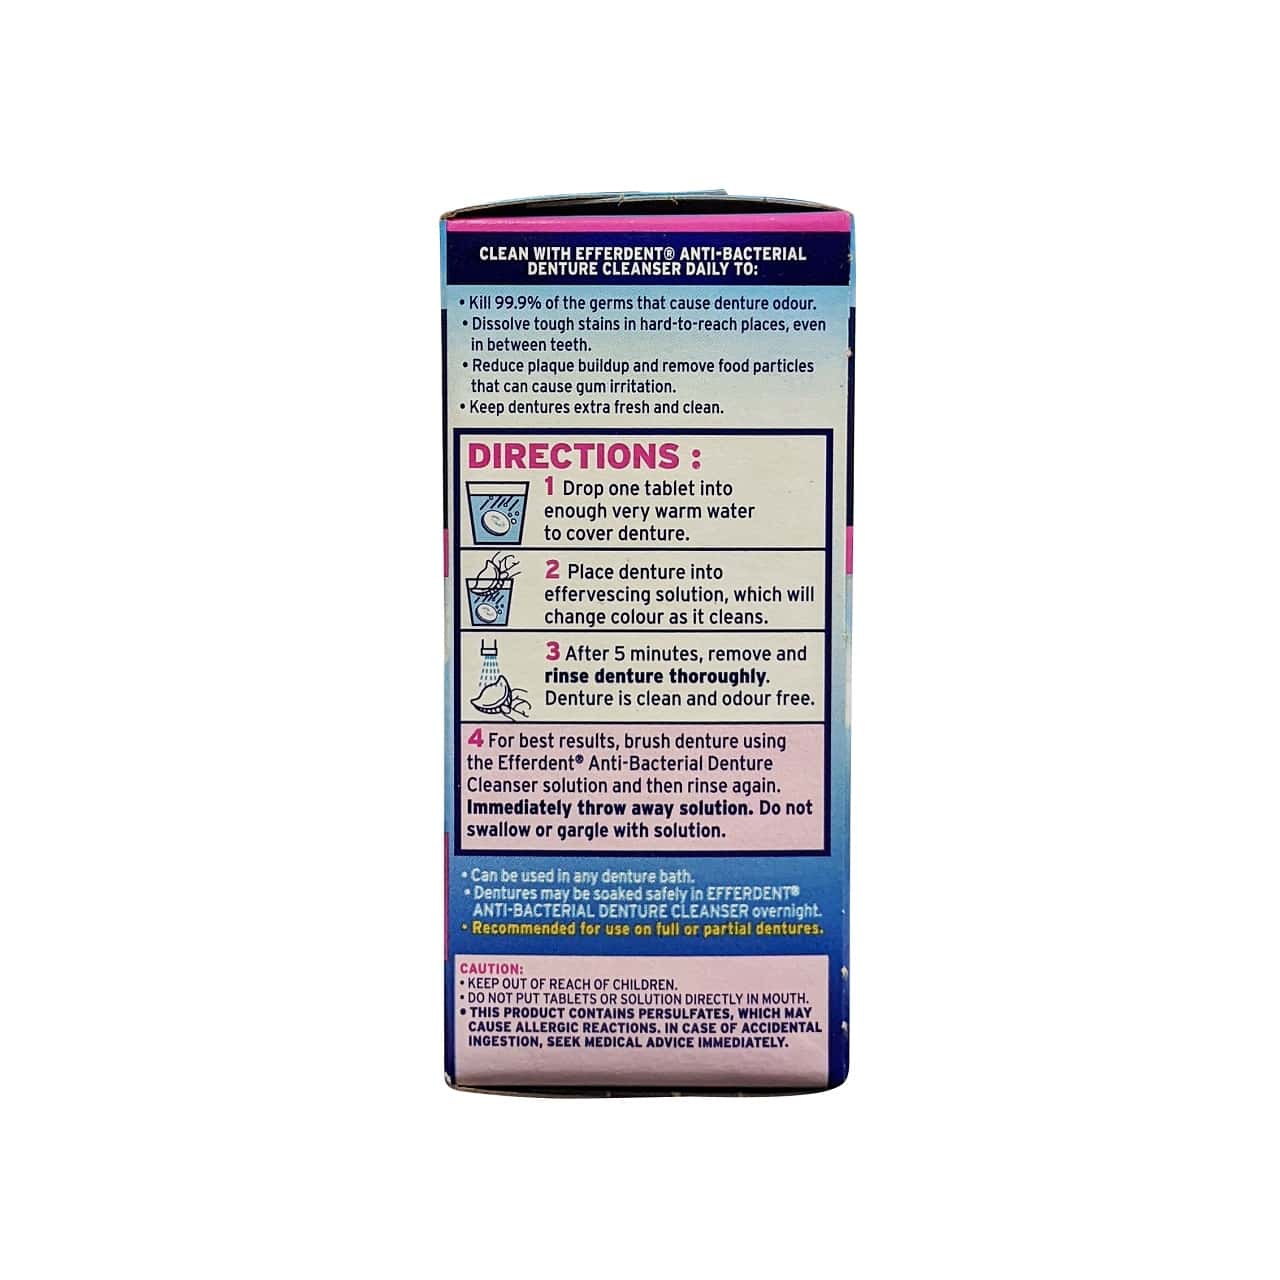 Description, directions, and cautions for Efferdent Complete Clean Antibacterial Denture Cleanser (32 tablets) in English